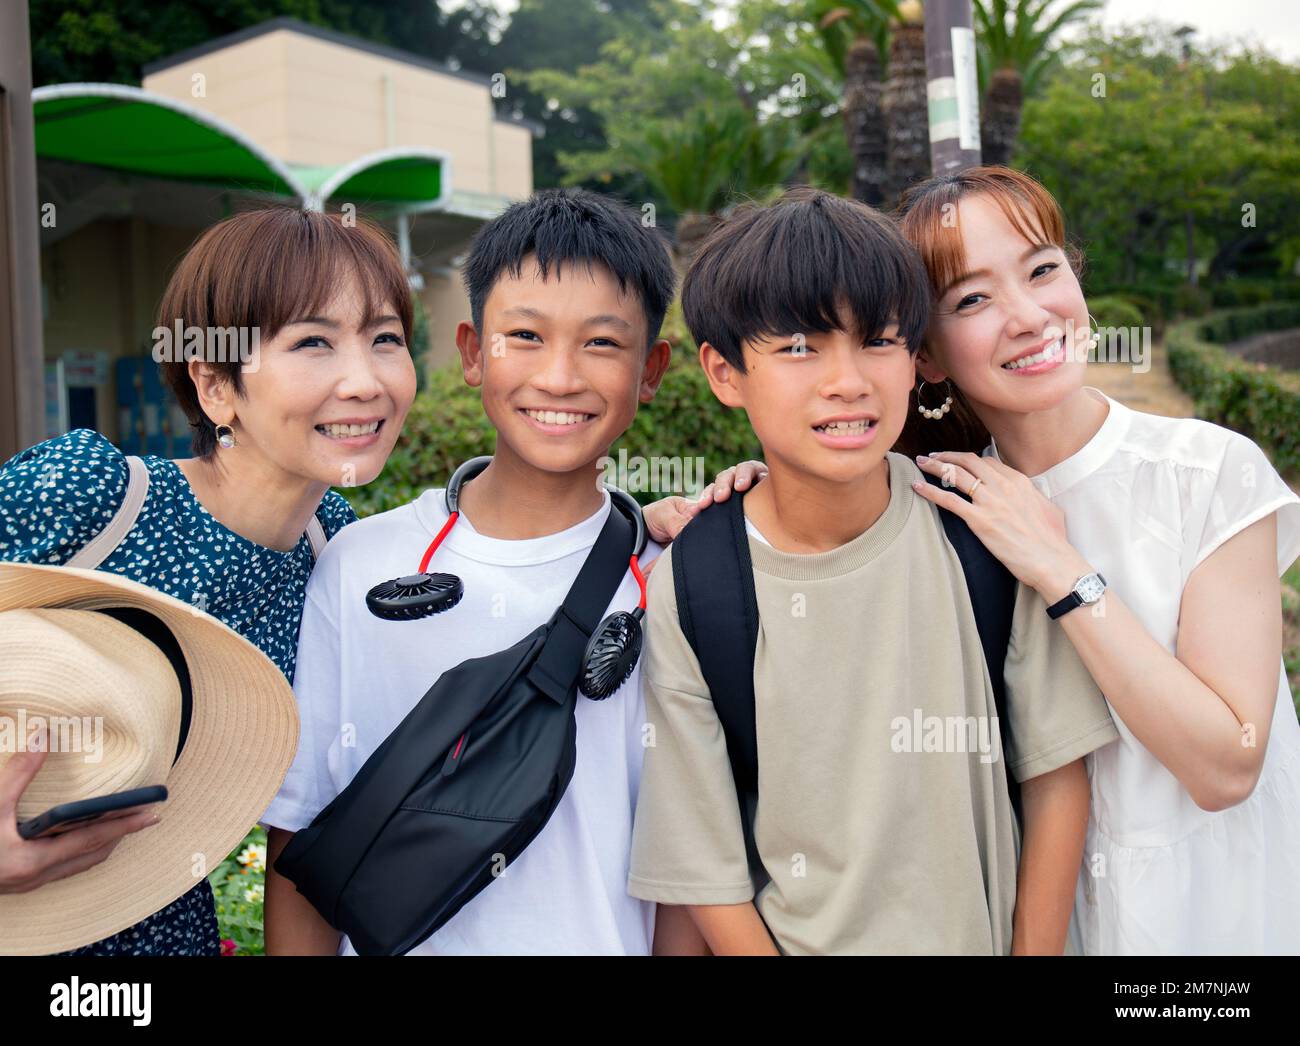 Four Japanese people on a outing, two mature women and two 13 year old boys, in a row, laughing. Stock Photo